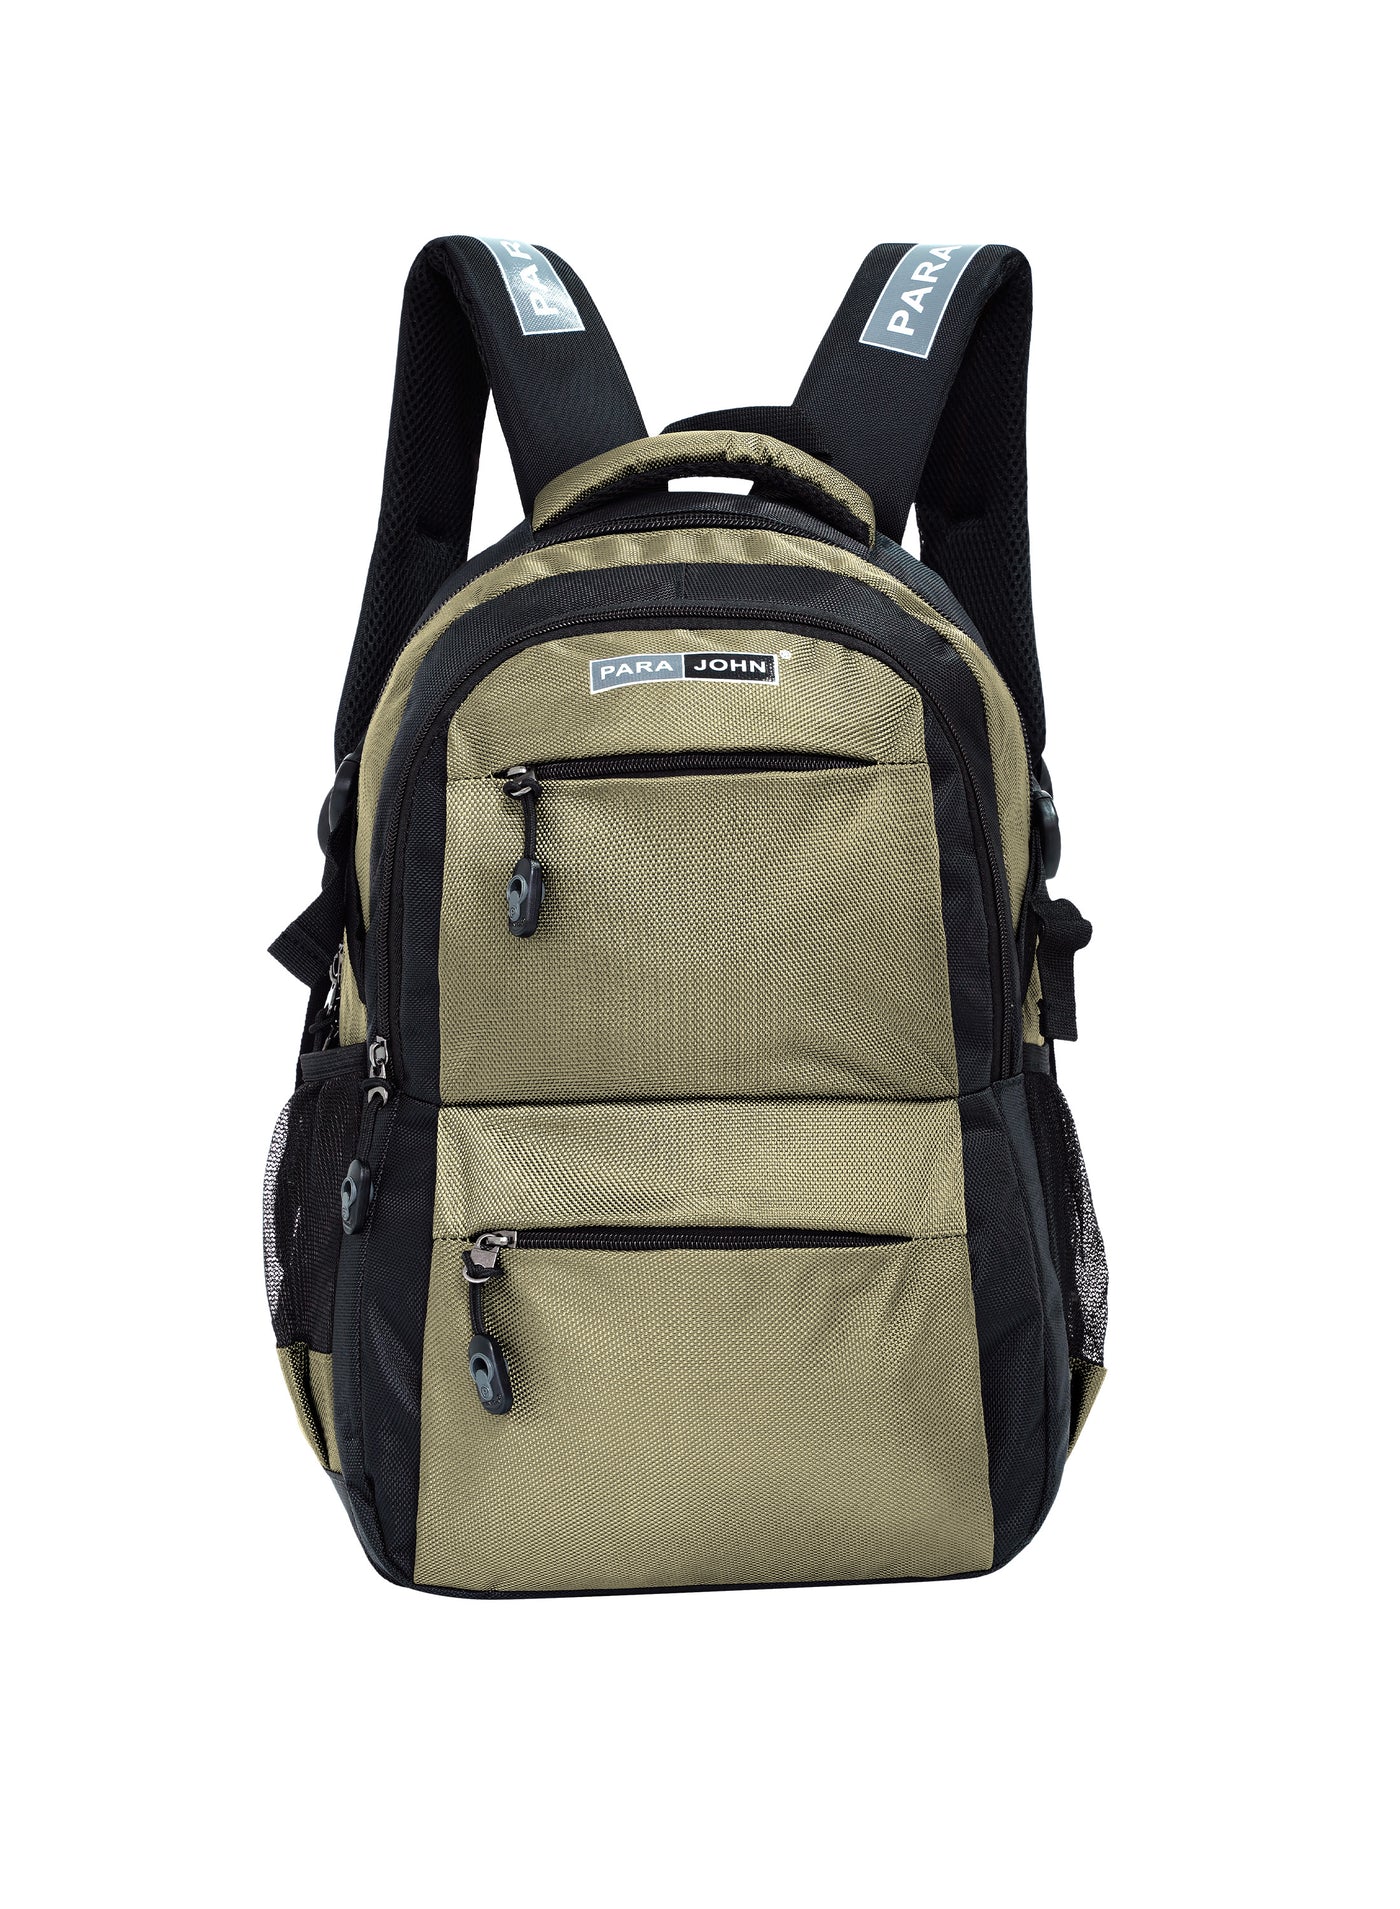 Classic Students School Backpack Gold 16 Inch